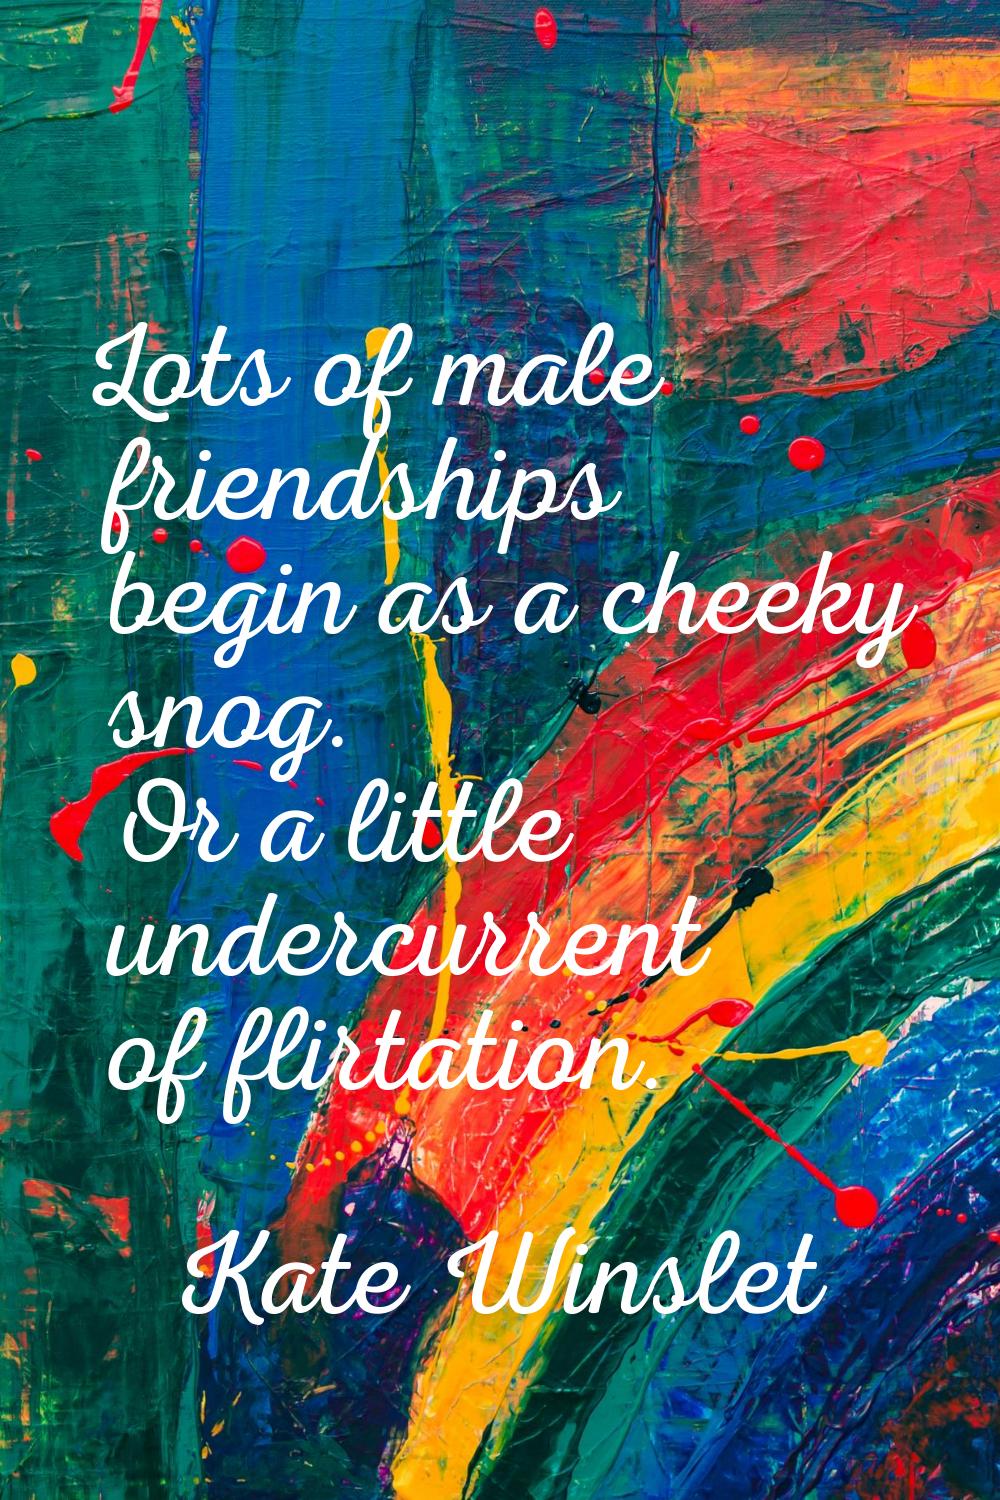 Lots of male friendships begin as a cheeky snog. Or a little undercurrent of flirtation.